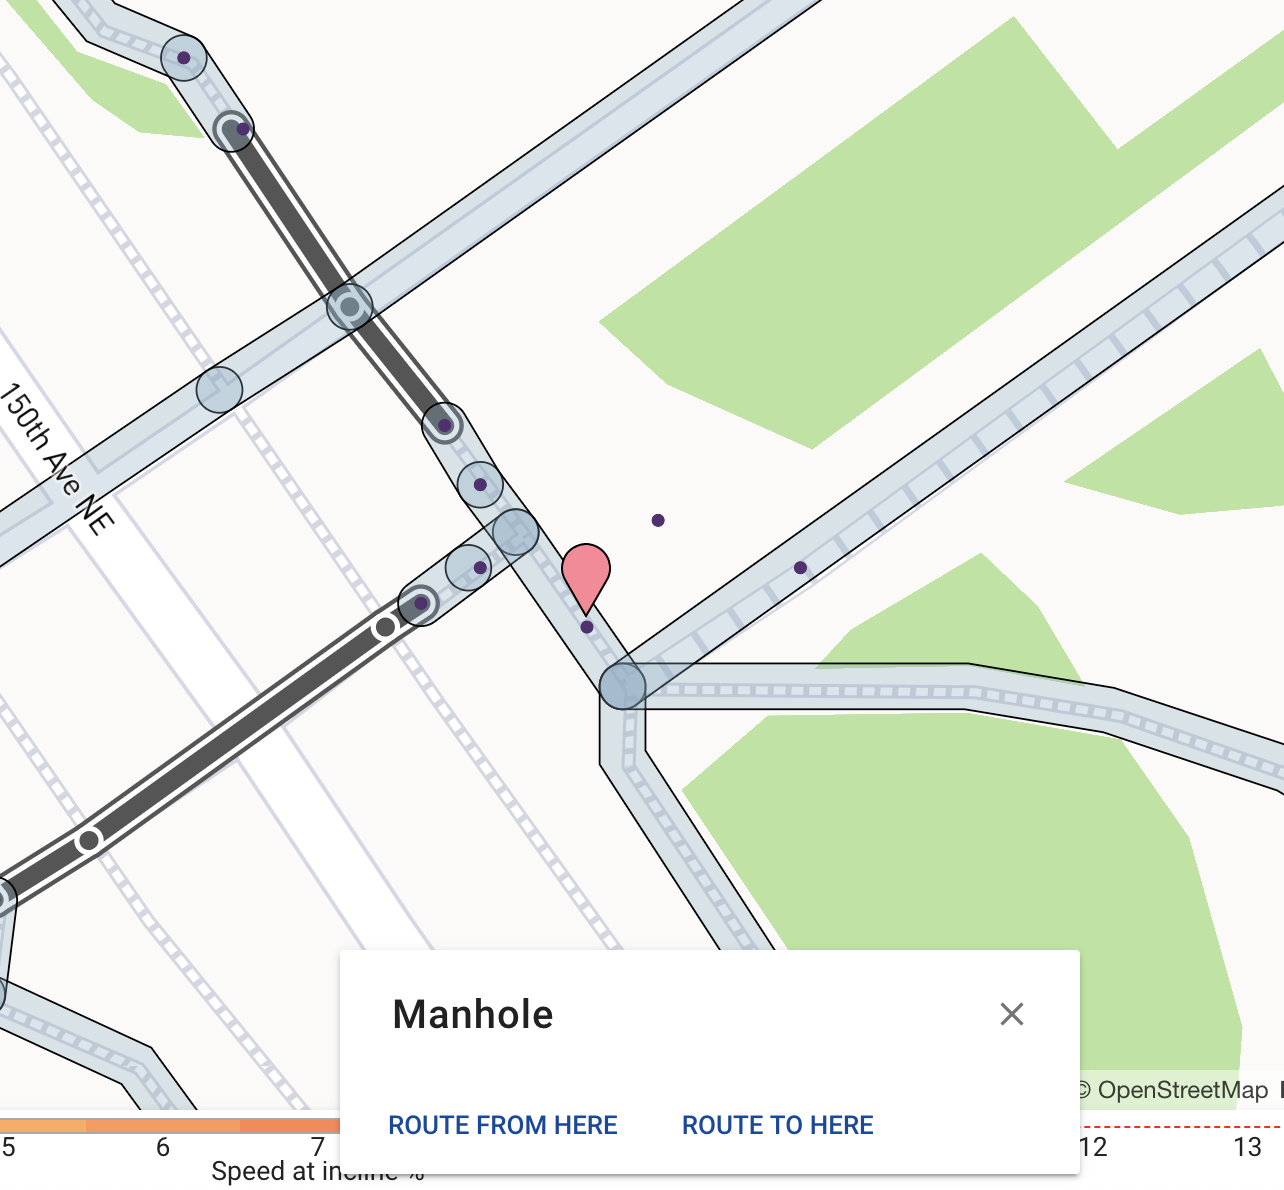 A screenshot of AccessMap with a point clicked on and its corresponding description, manhole.